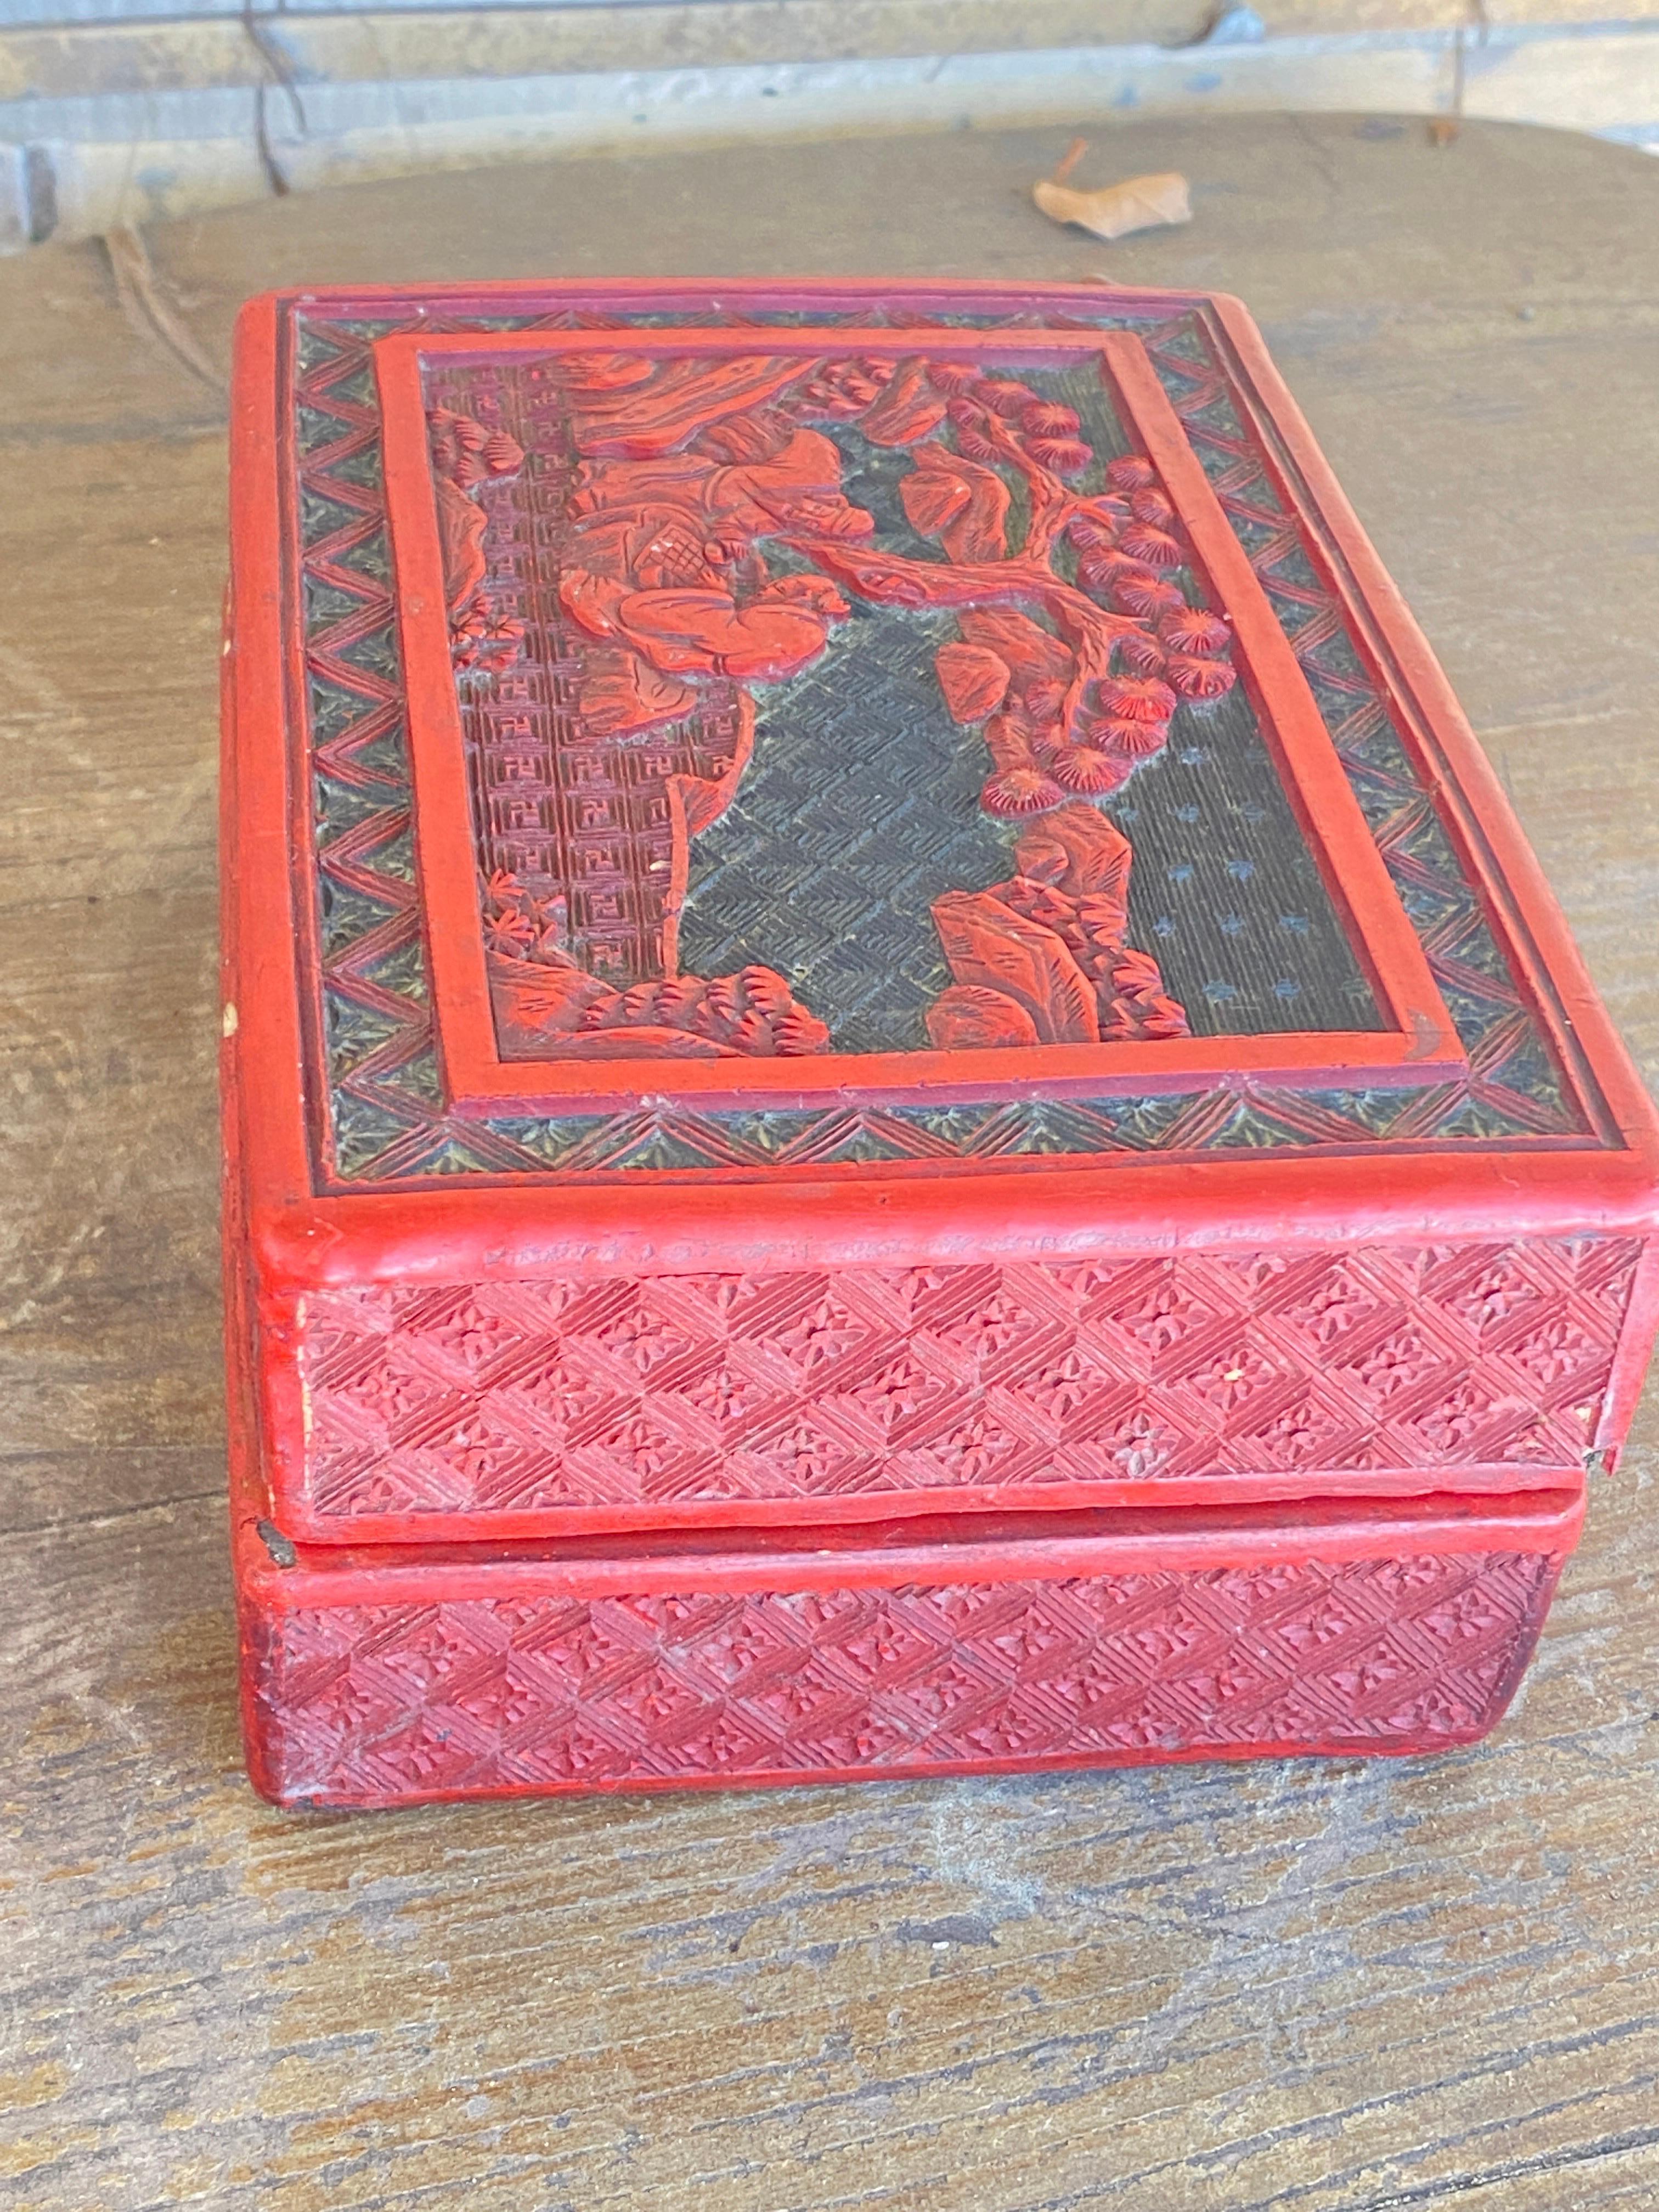 Red lacquer box with the lid representing a scholar and children playing in a mountainous garden, the outer sides covered with repeated geometric patterns. This box was made in China at the end of the 19th century, around 1880. It is typical of this